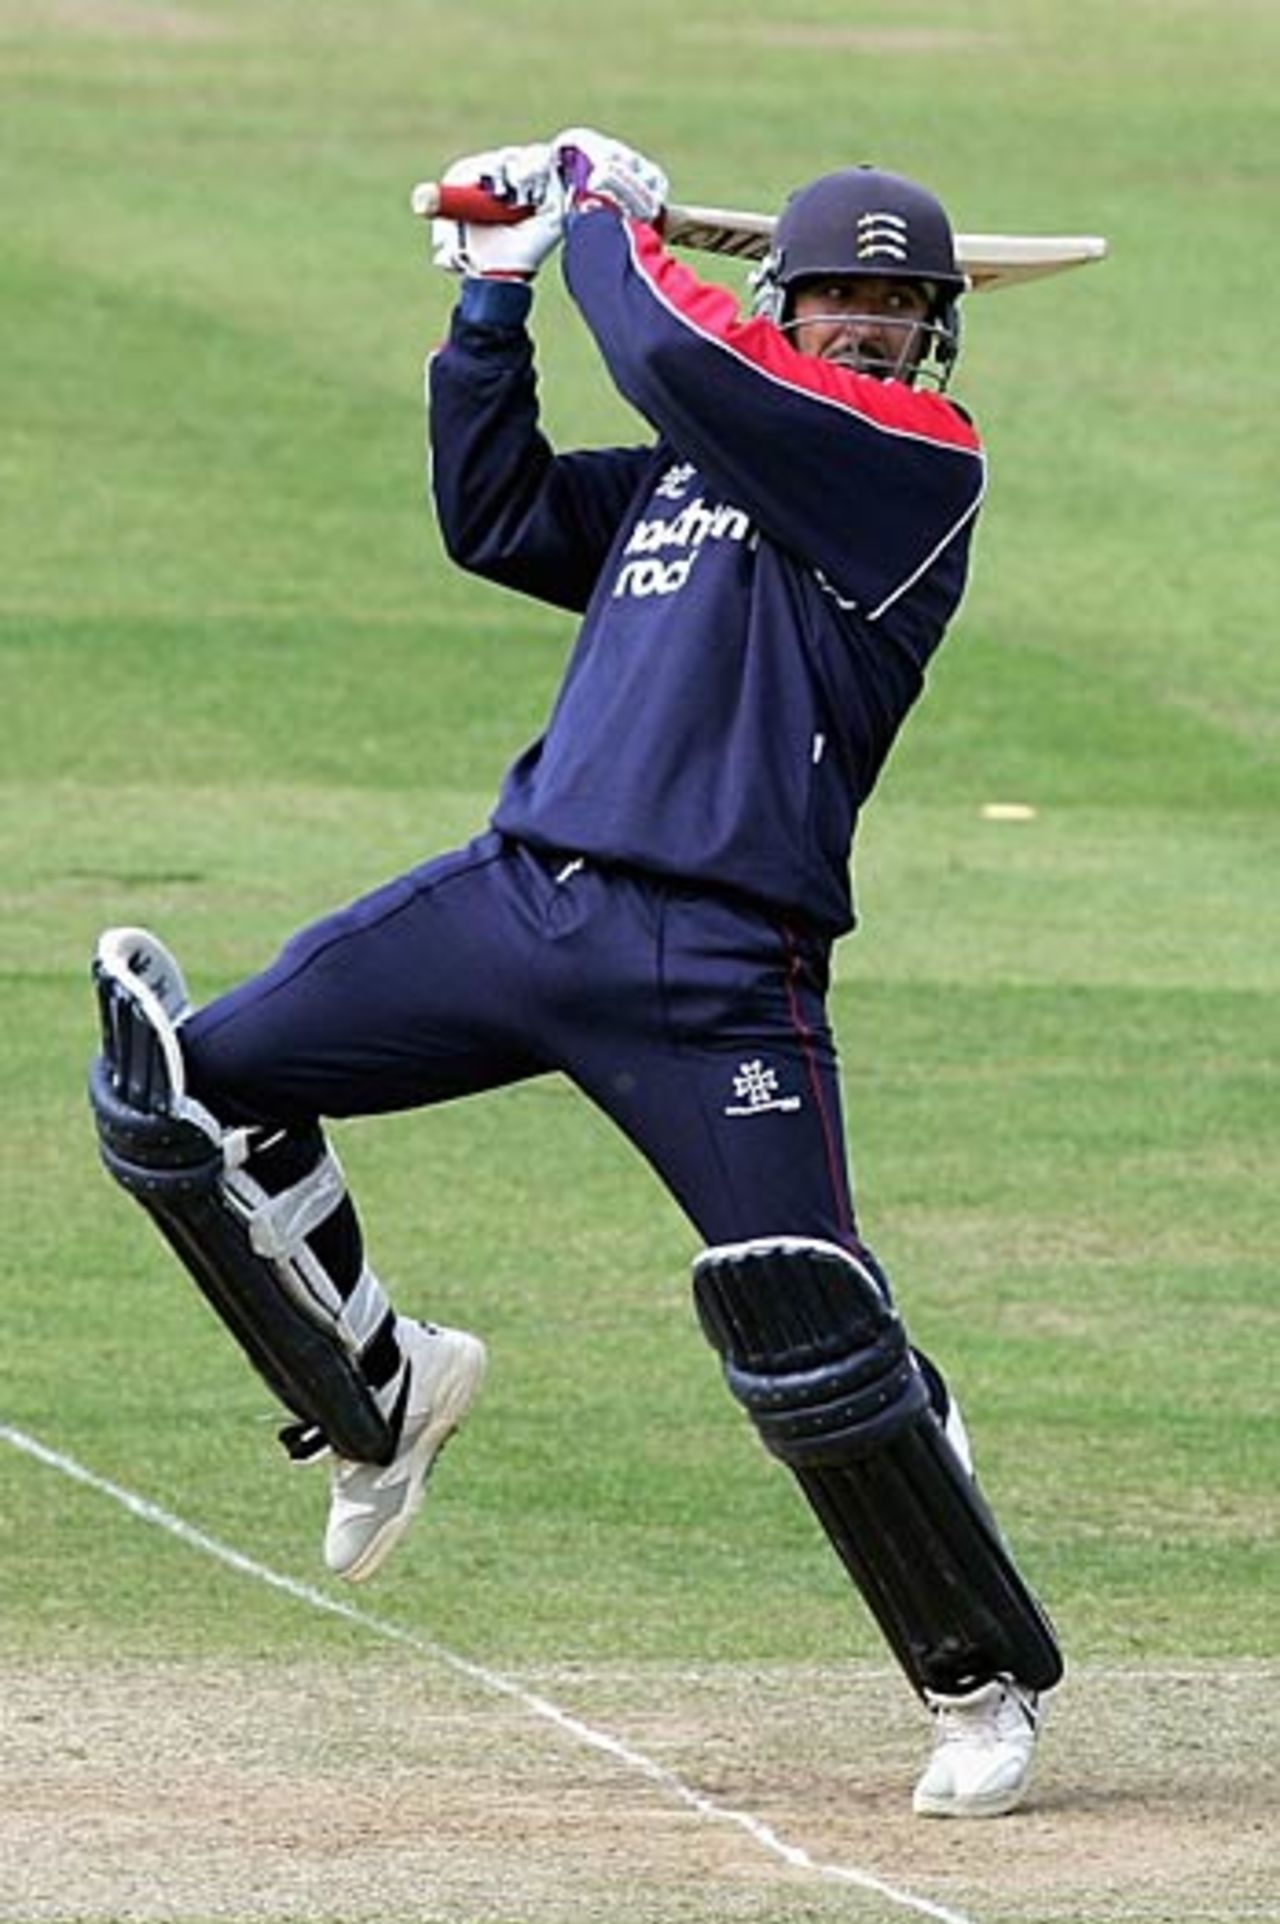 Paul Weekes on his way to 105, Middlesex v Northamptonshire, C&G Trophy, Lord's, May 17